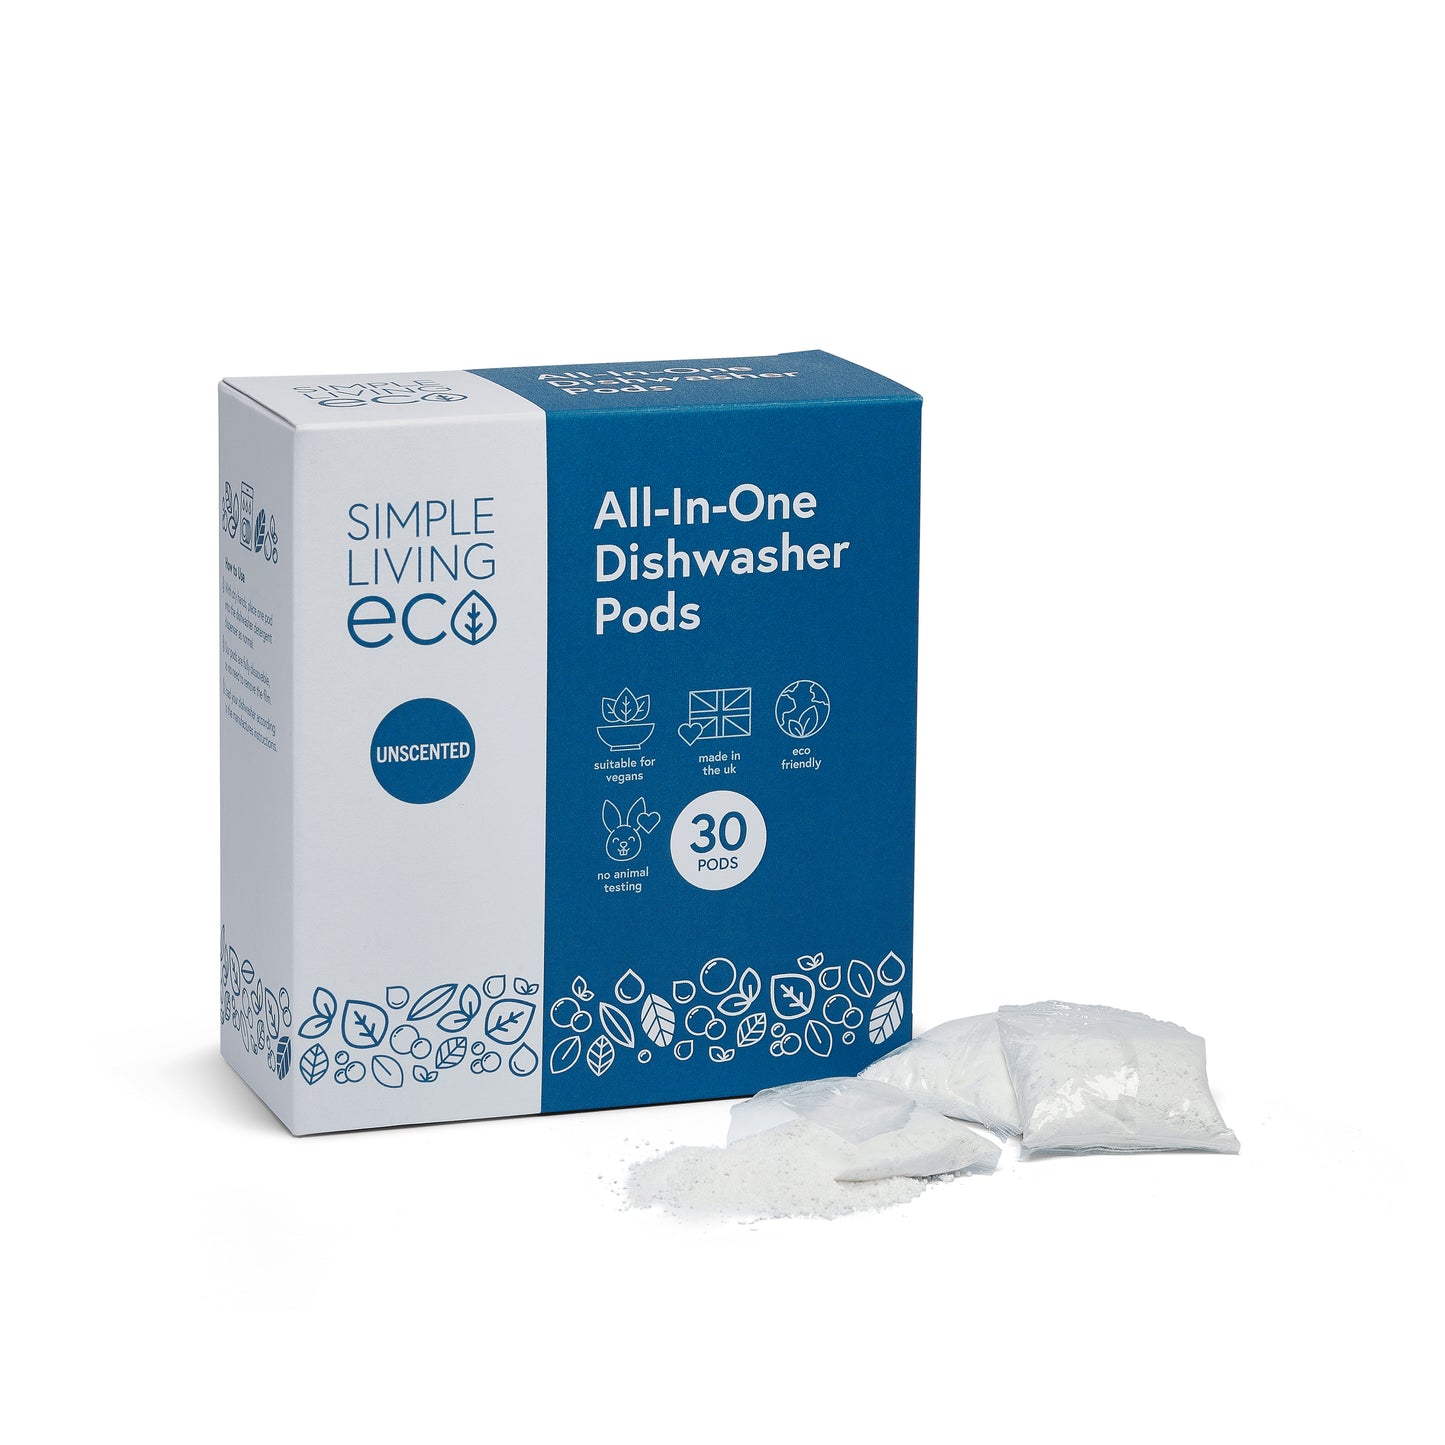 All-In-One Dishwasher Pods (30)